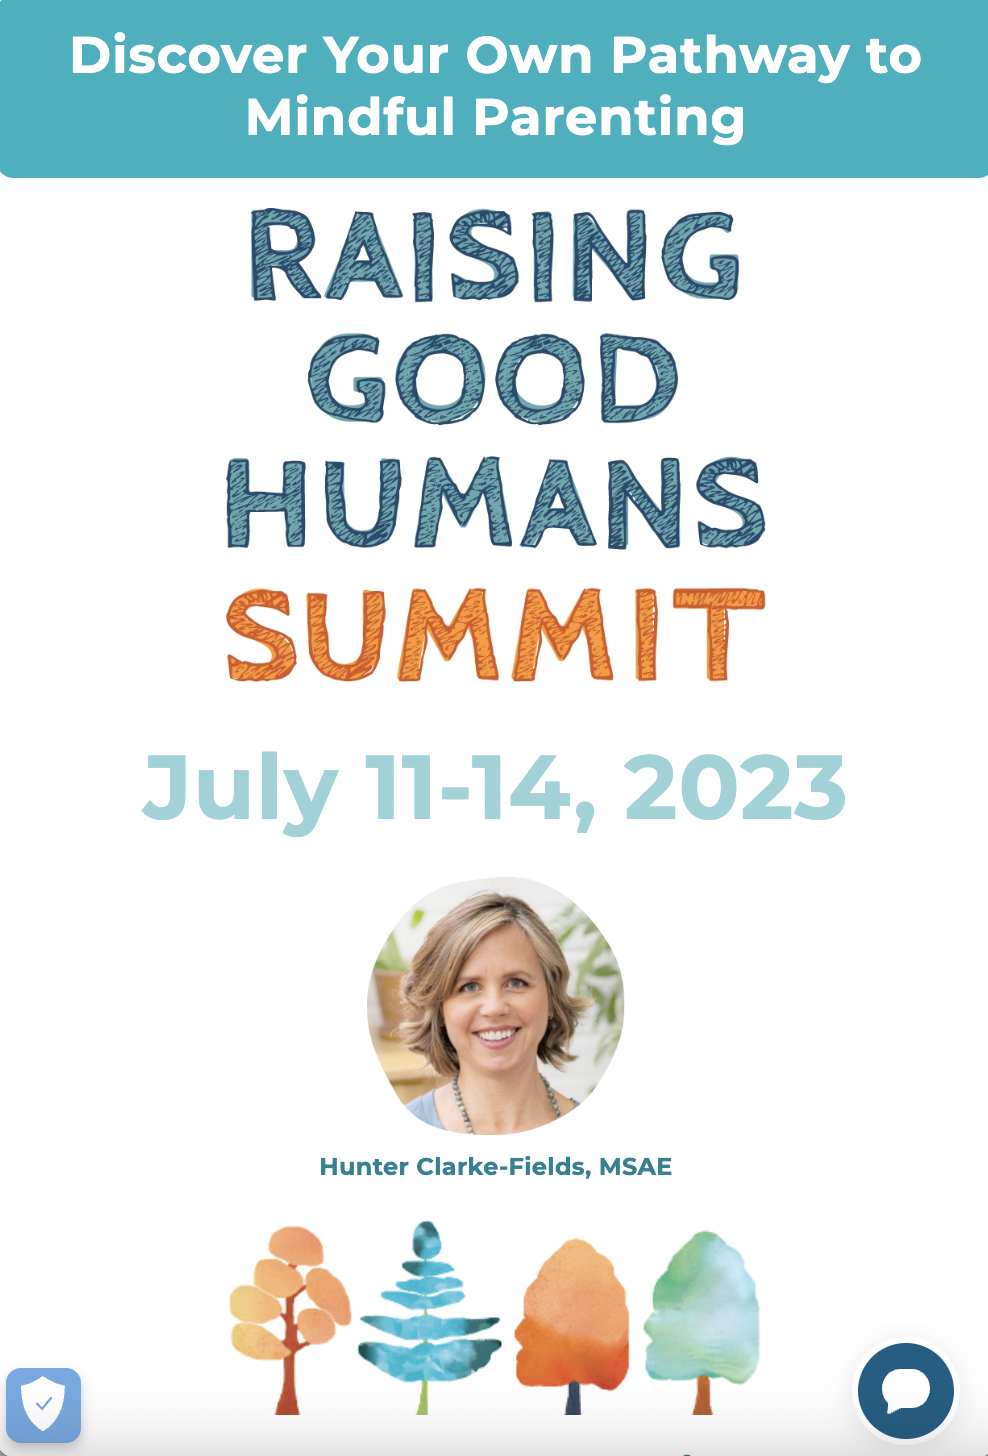 Raising Good Humans Online Summit July 11-14 will be hosted by Mindful Mama Mentor Hunter Clarke-Fields to Help Parents and Kids Thrive